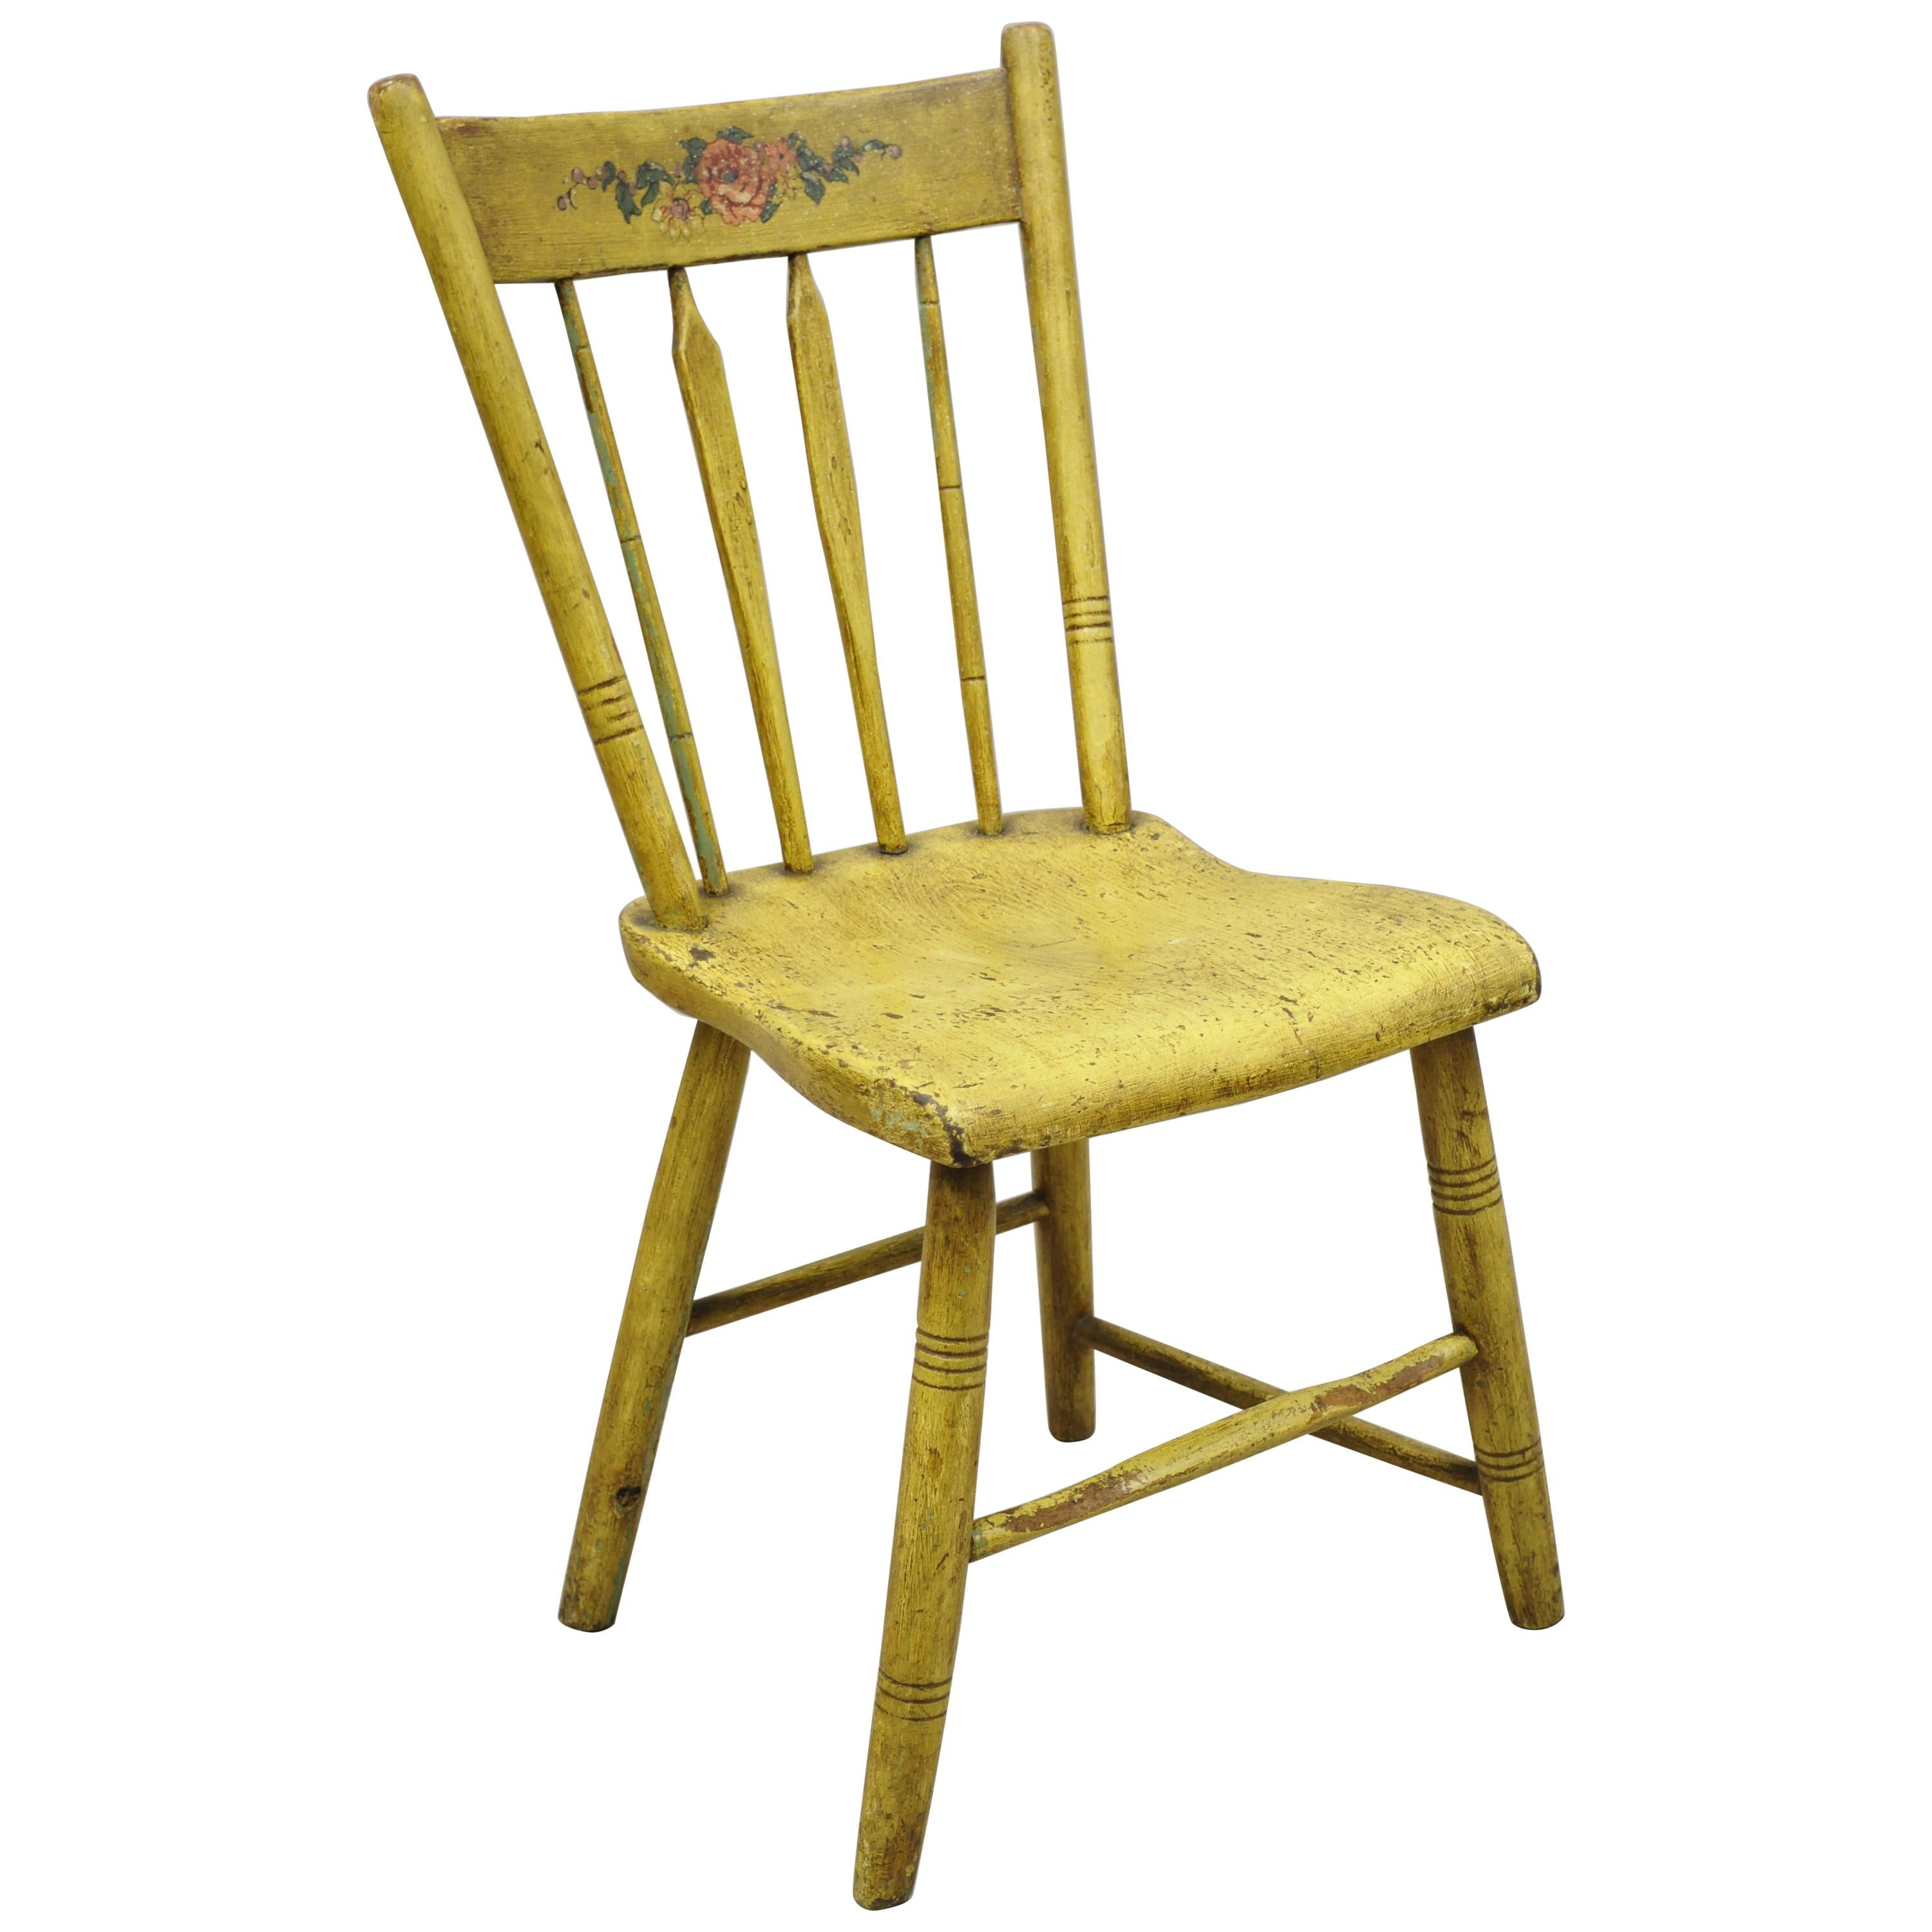 Frederick Loeser & Co Yellow American Primitive Hitchcock Painted Side Chair 'B' For Sale